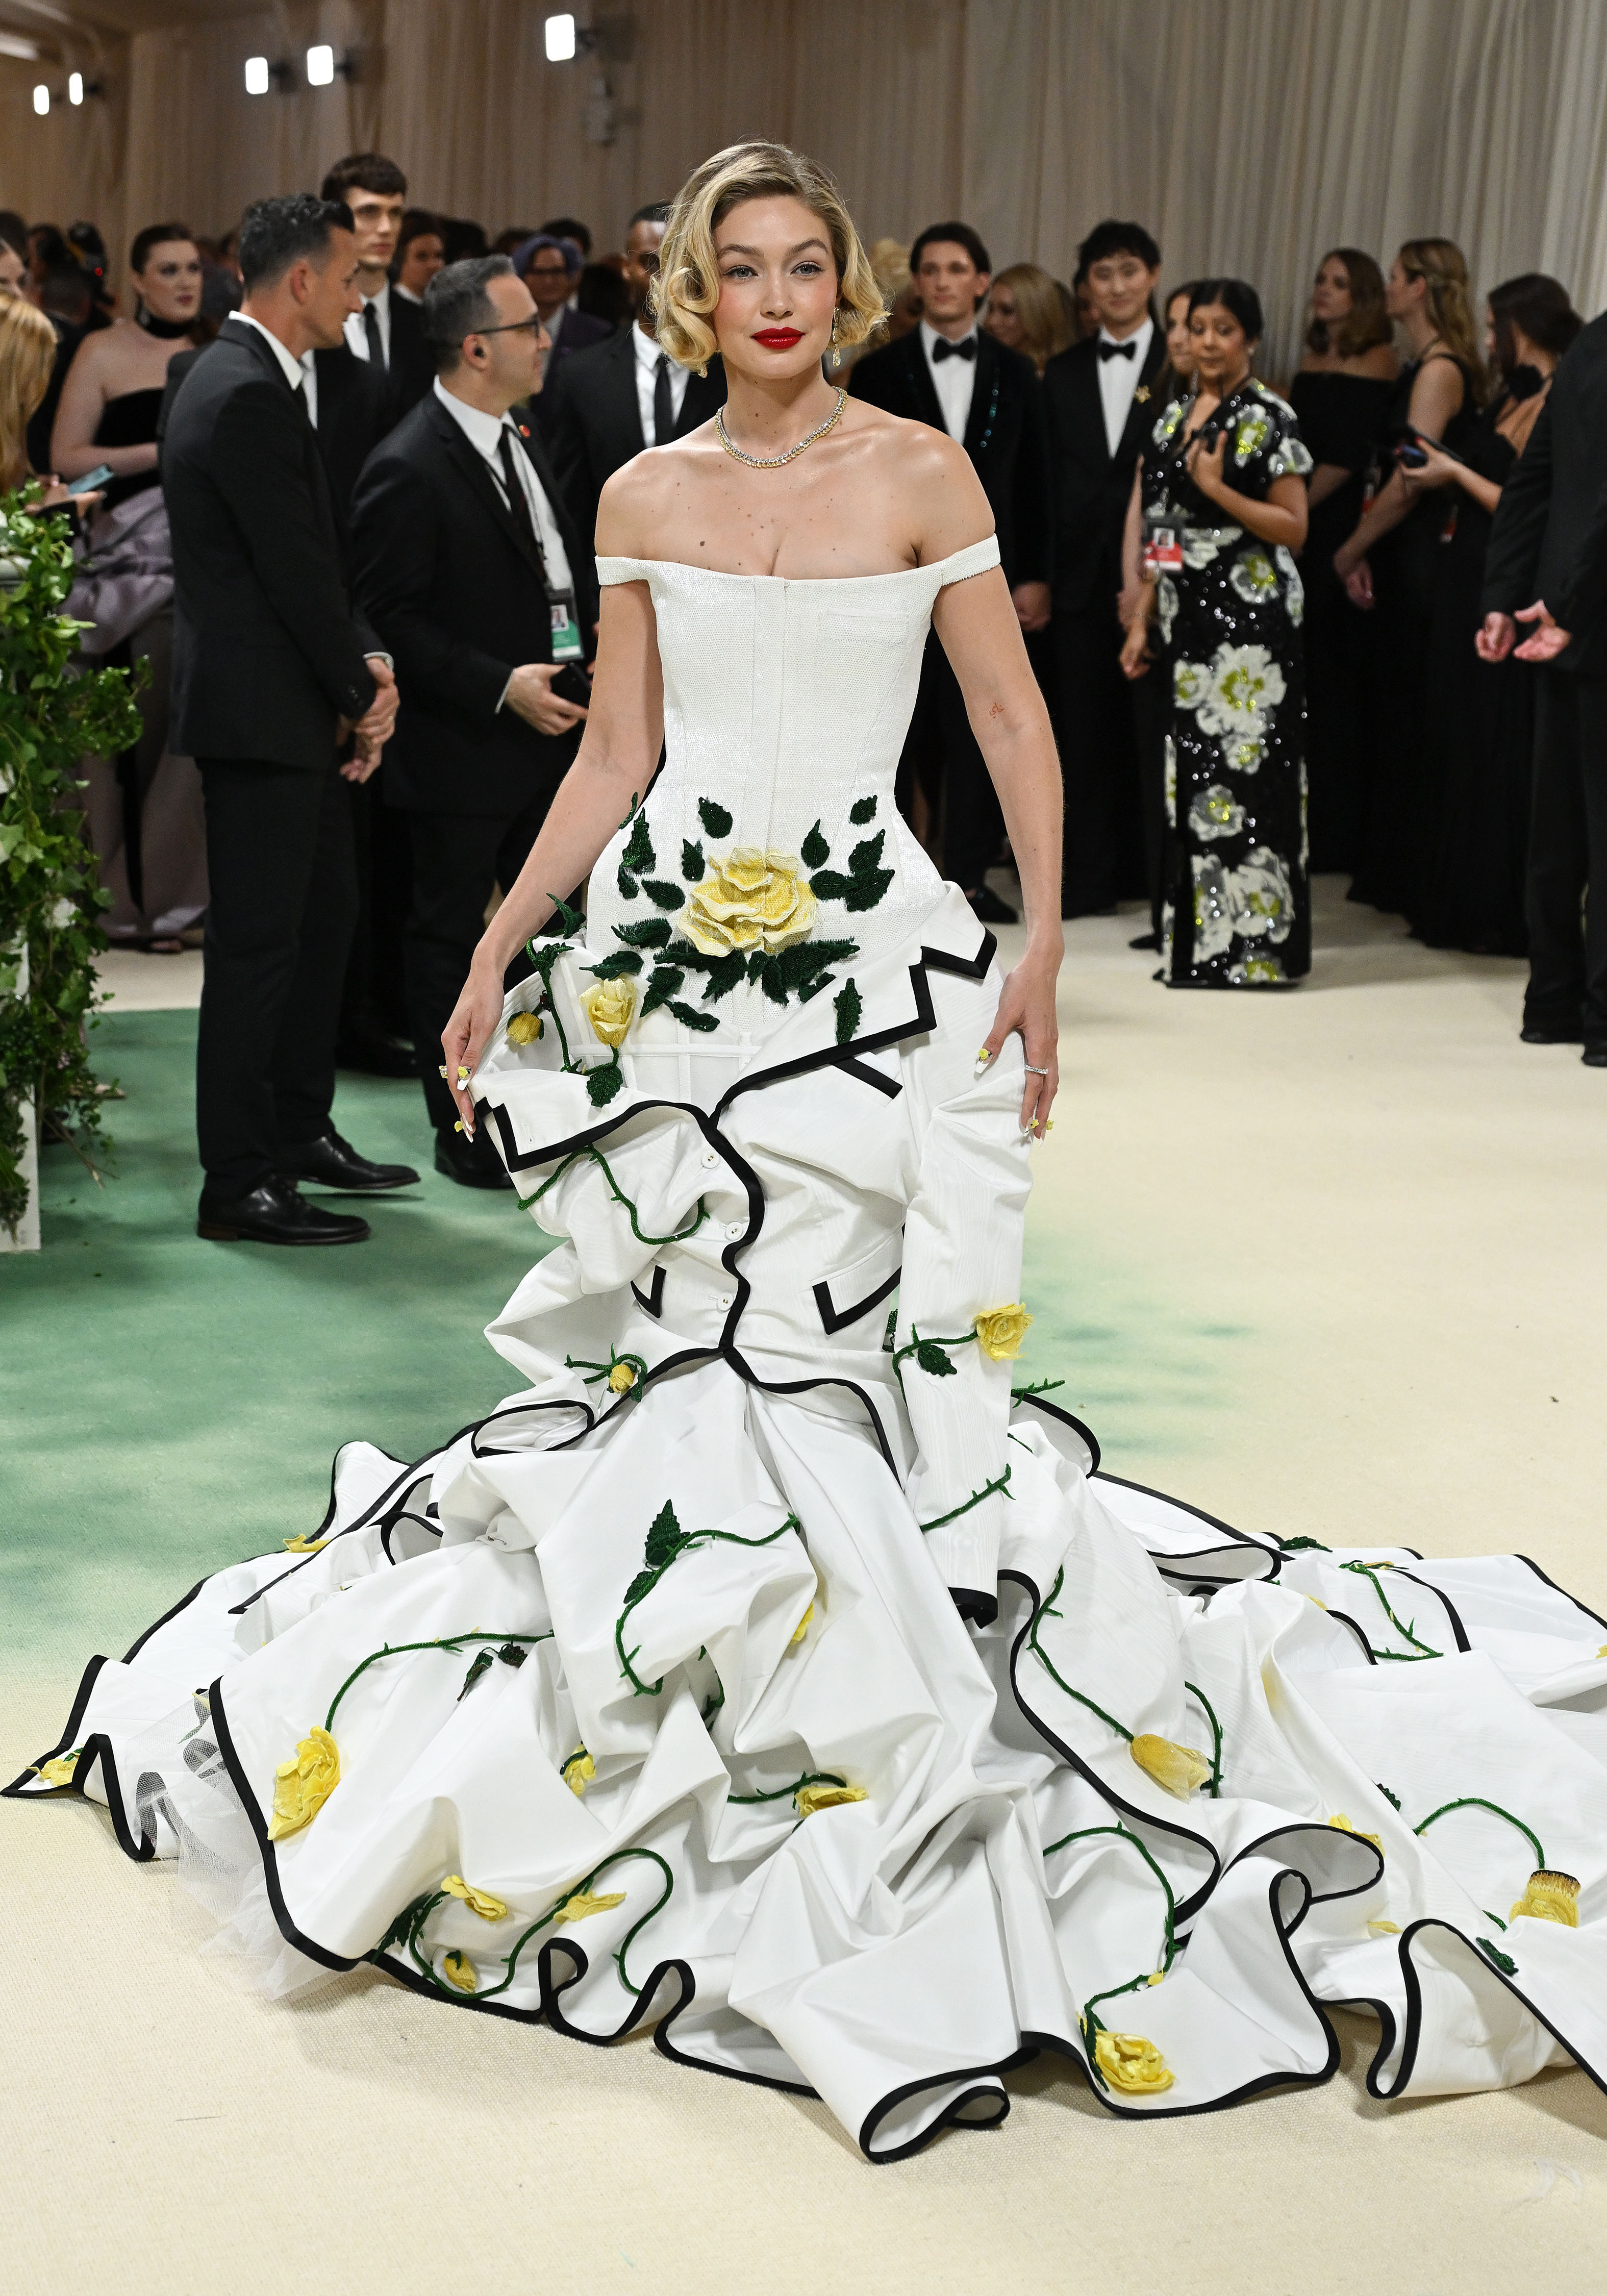 Gigi Hadid in a white cascading gown with black trim and yellow rose accents, standing at an event